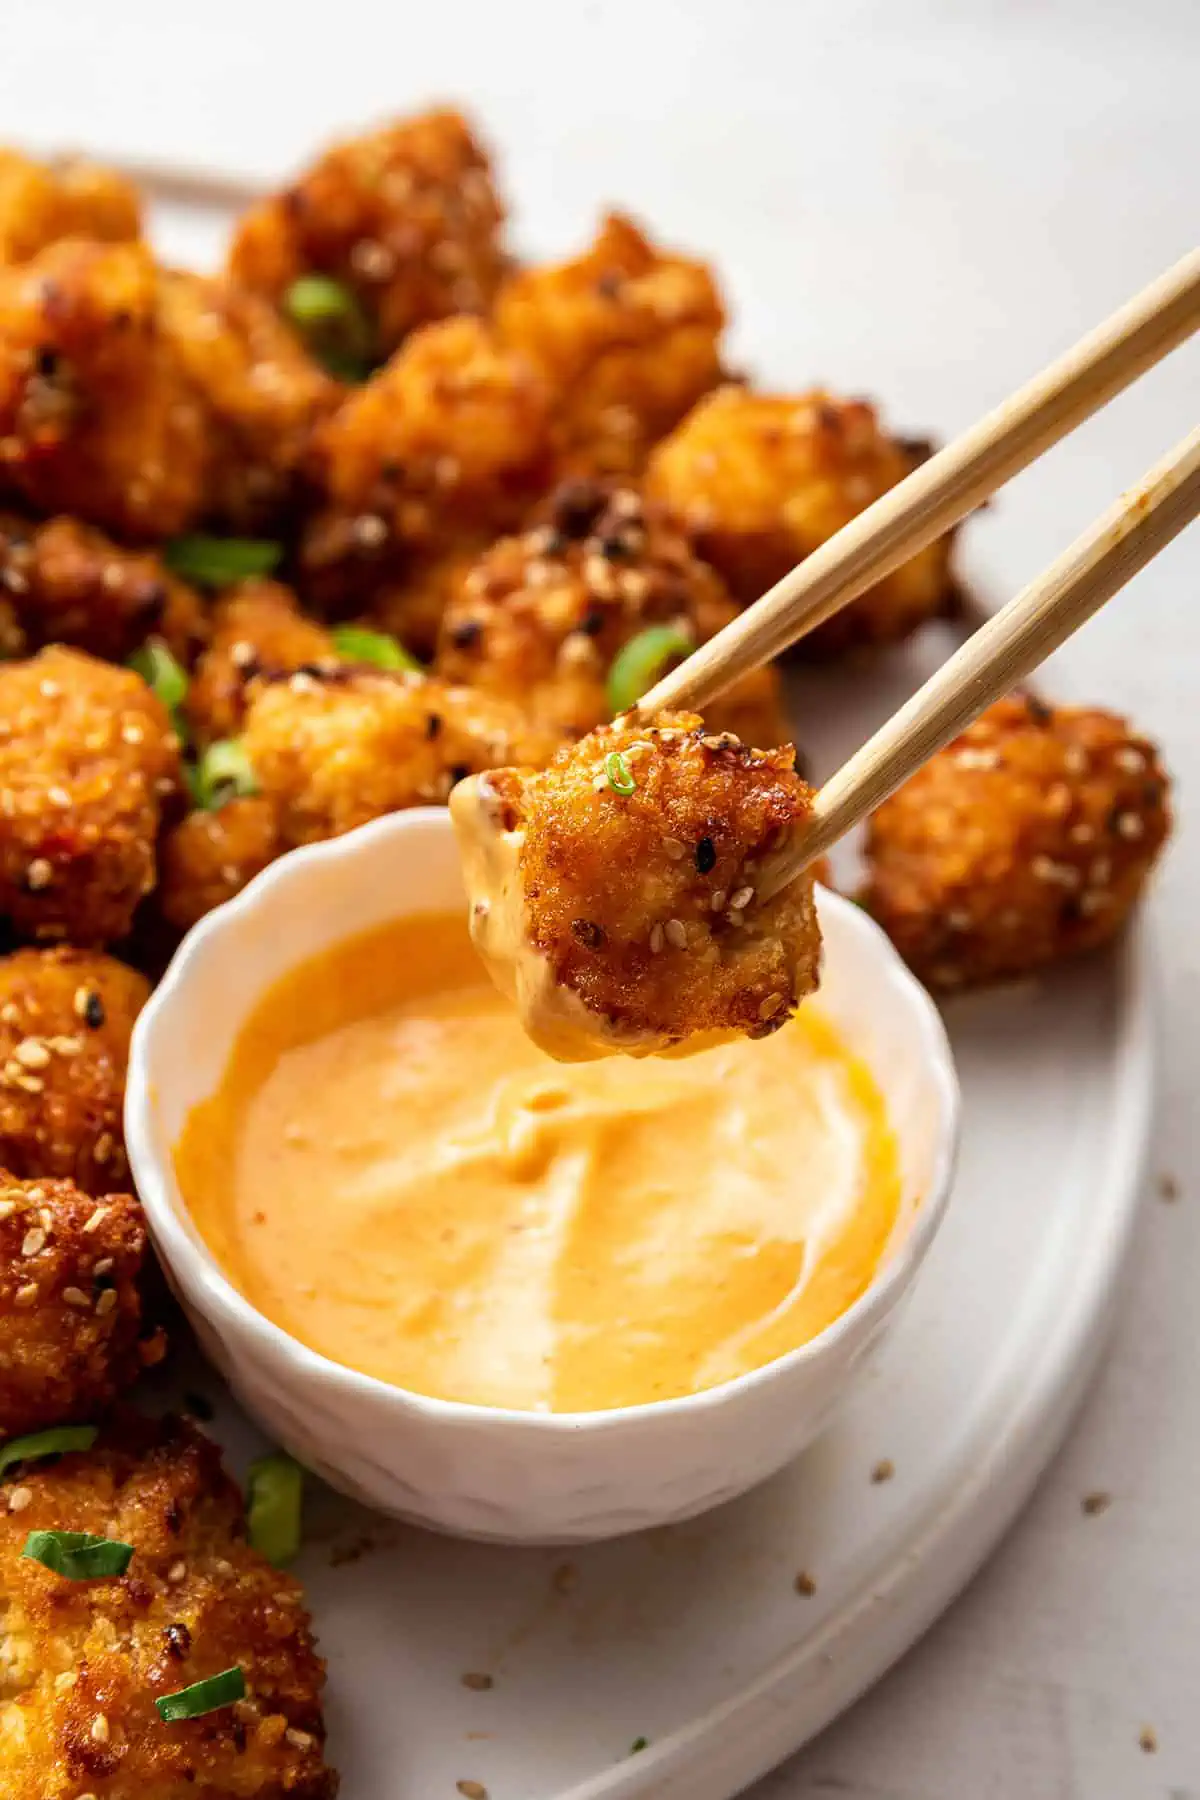 A pair of chopsticks dipping a piece of bang bang cauliflower into dipping sauce, with a serving tray of cailflower behind it